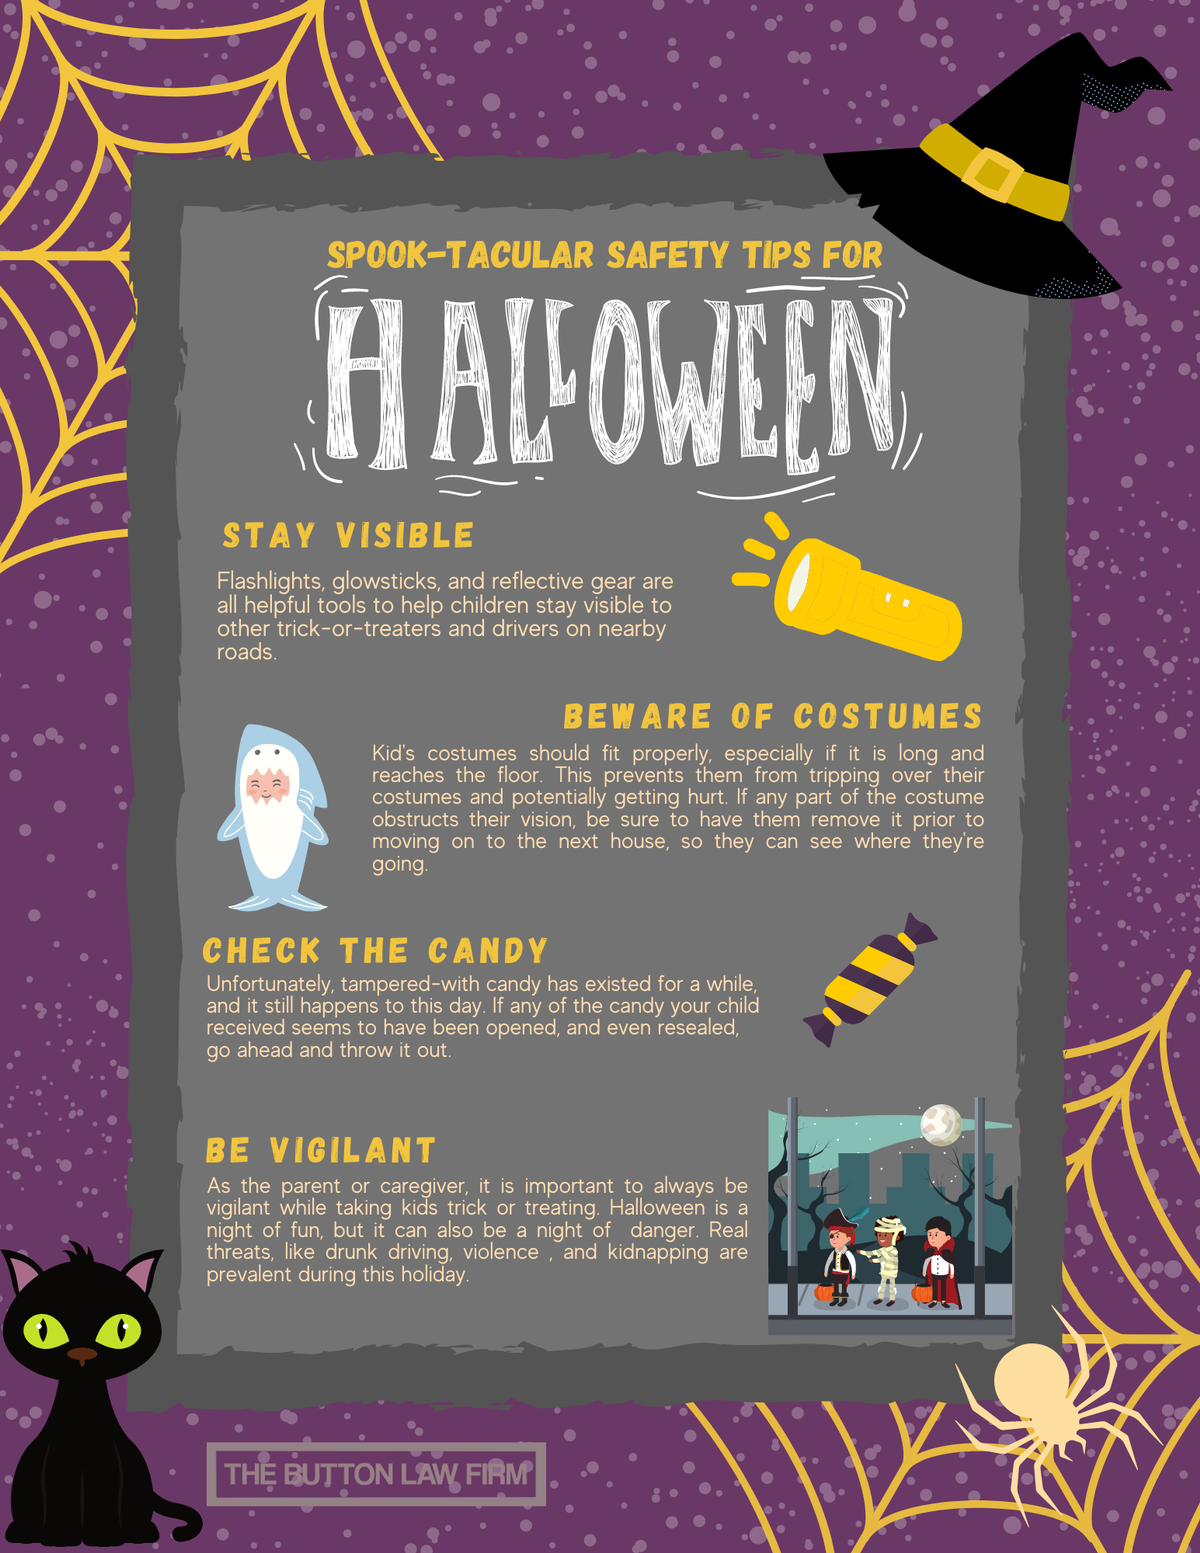 Spooktacular Safety Tips for Halloween